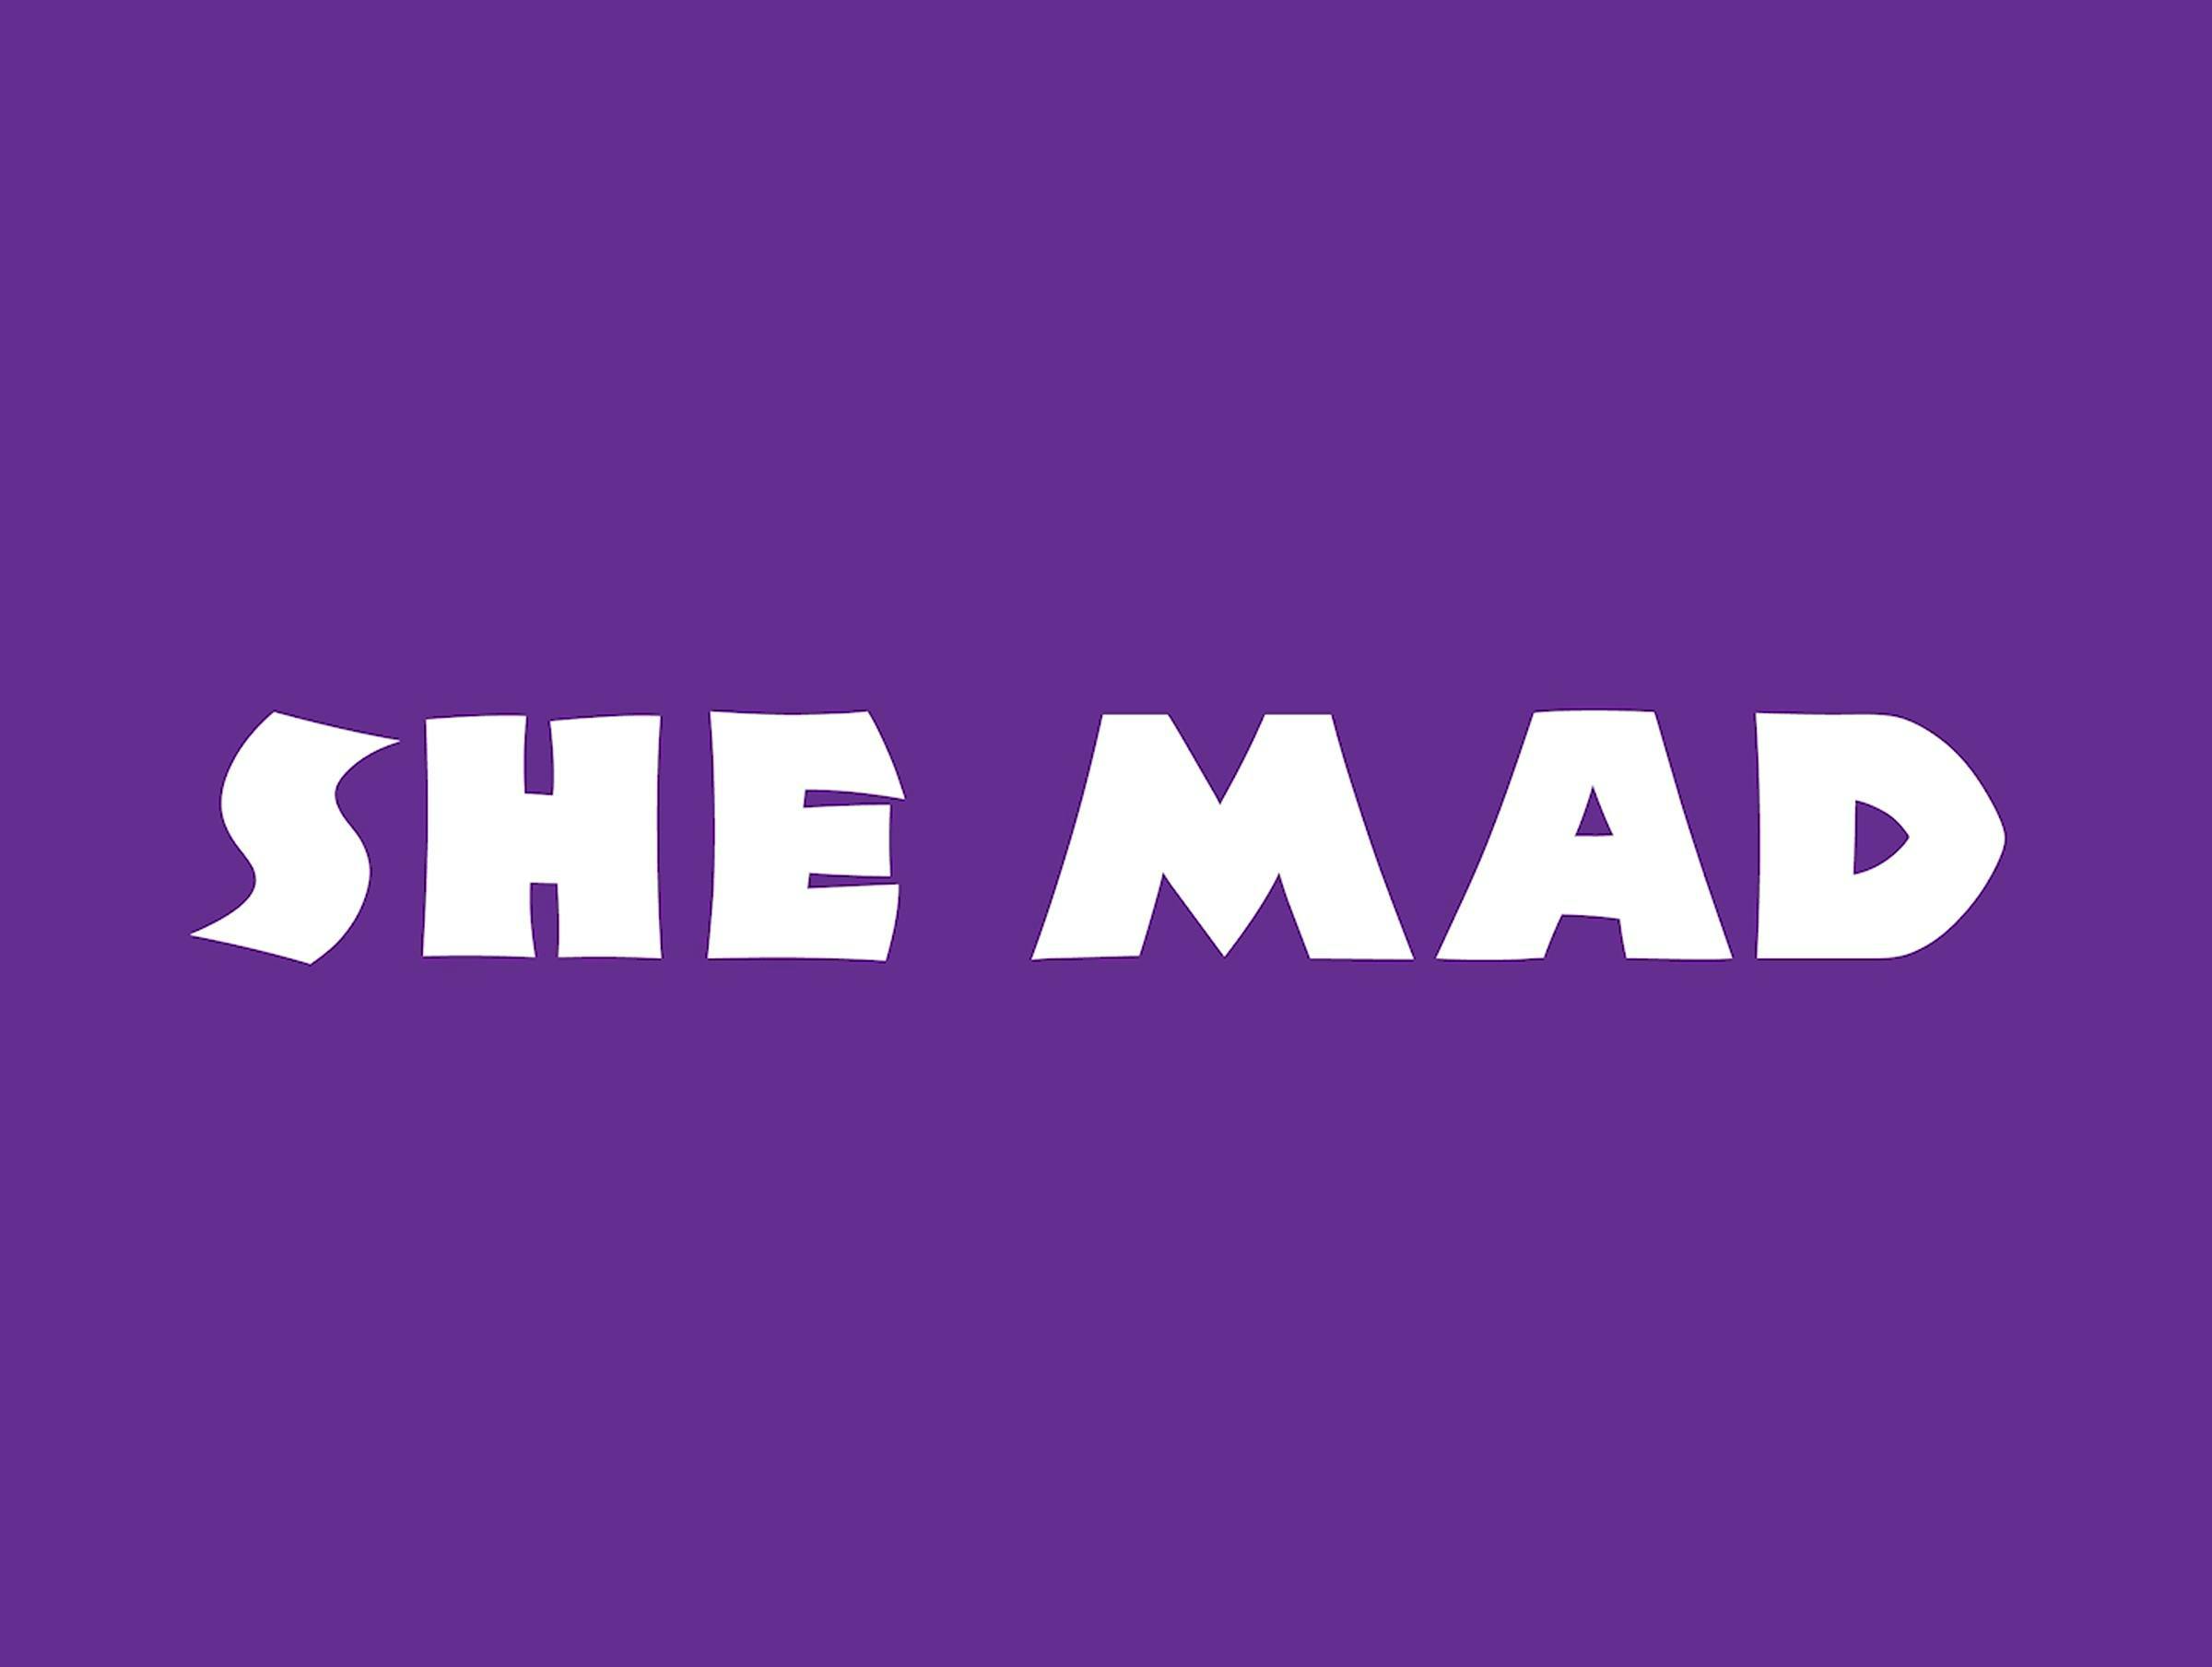 white text 'she mad' is written on a purple back ground